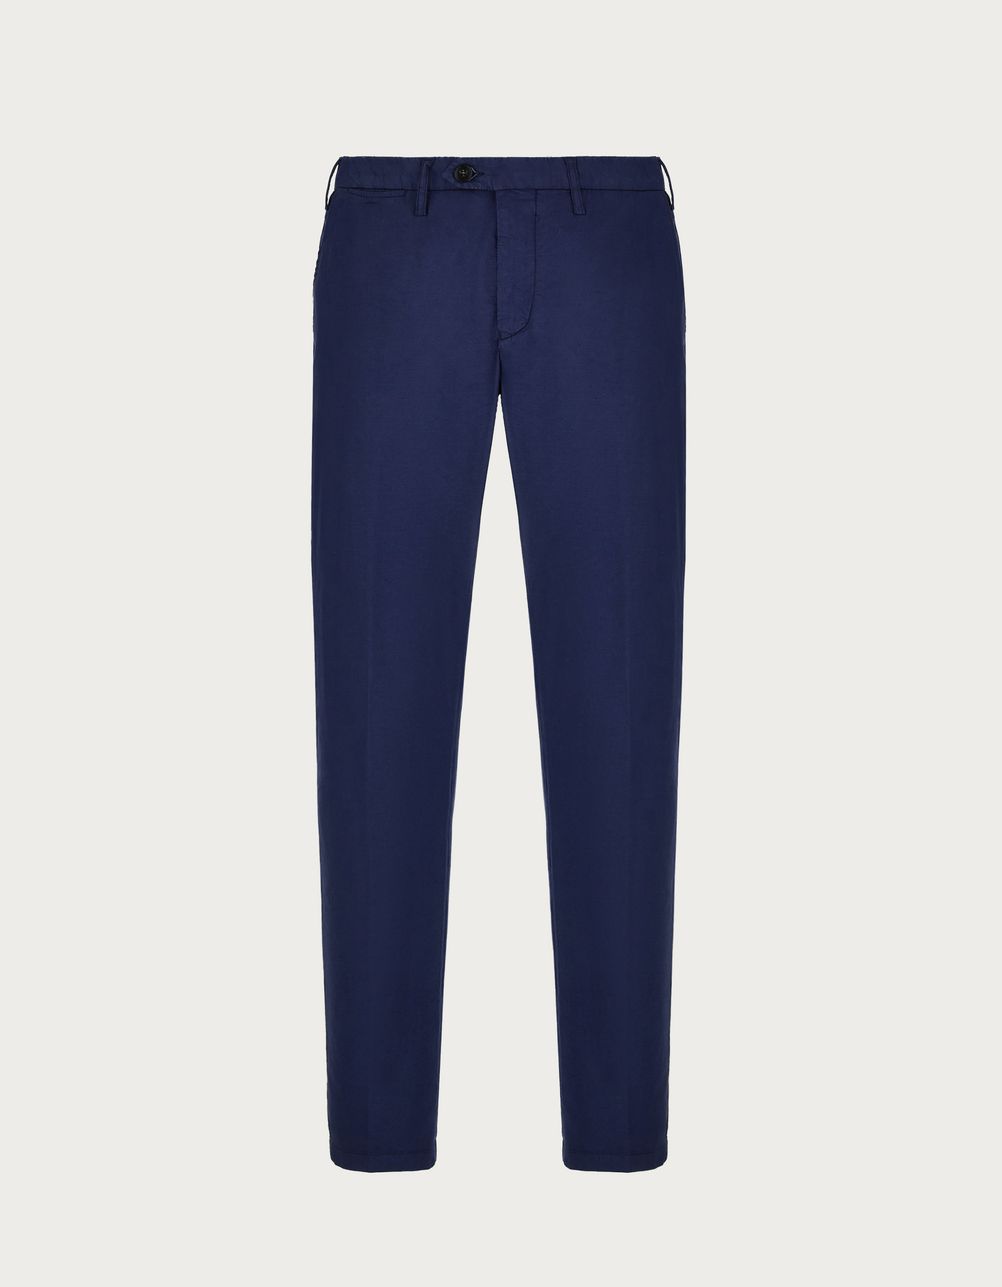 Chinos in navy blue garment-dyed cotton and silk twill